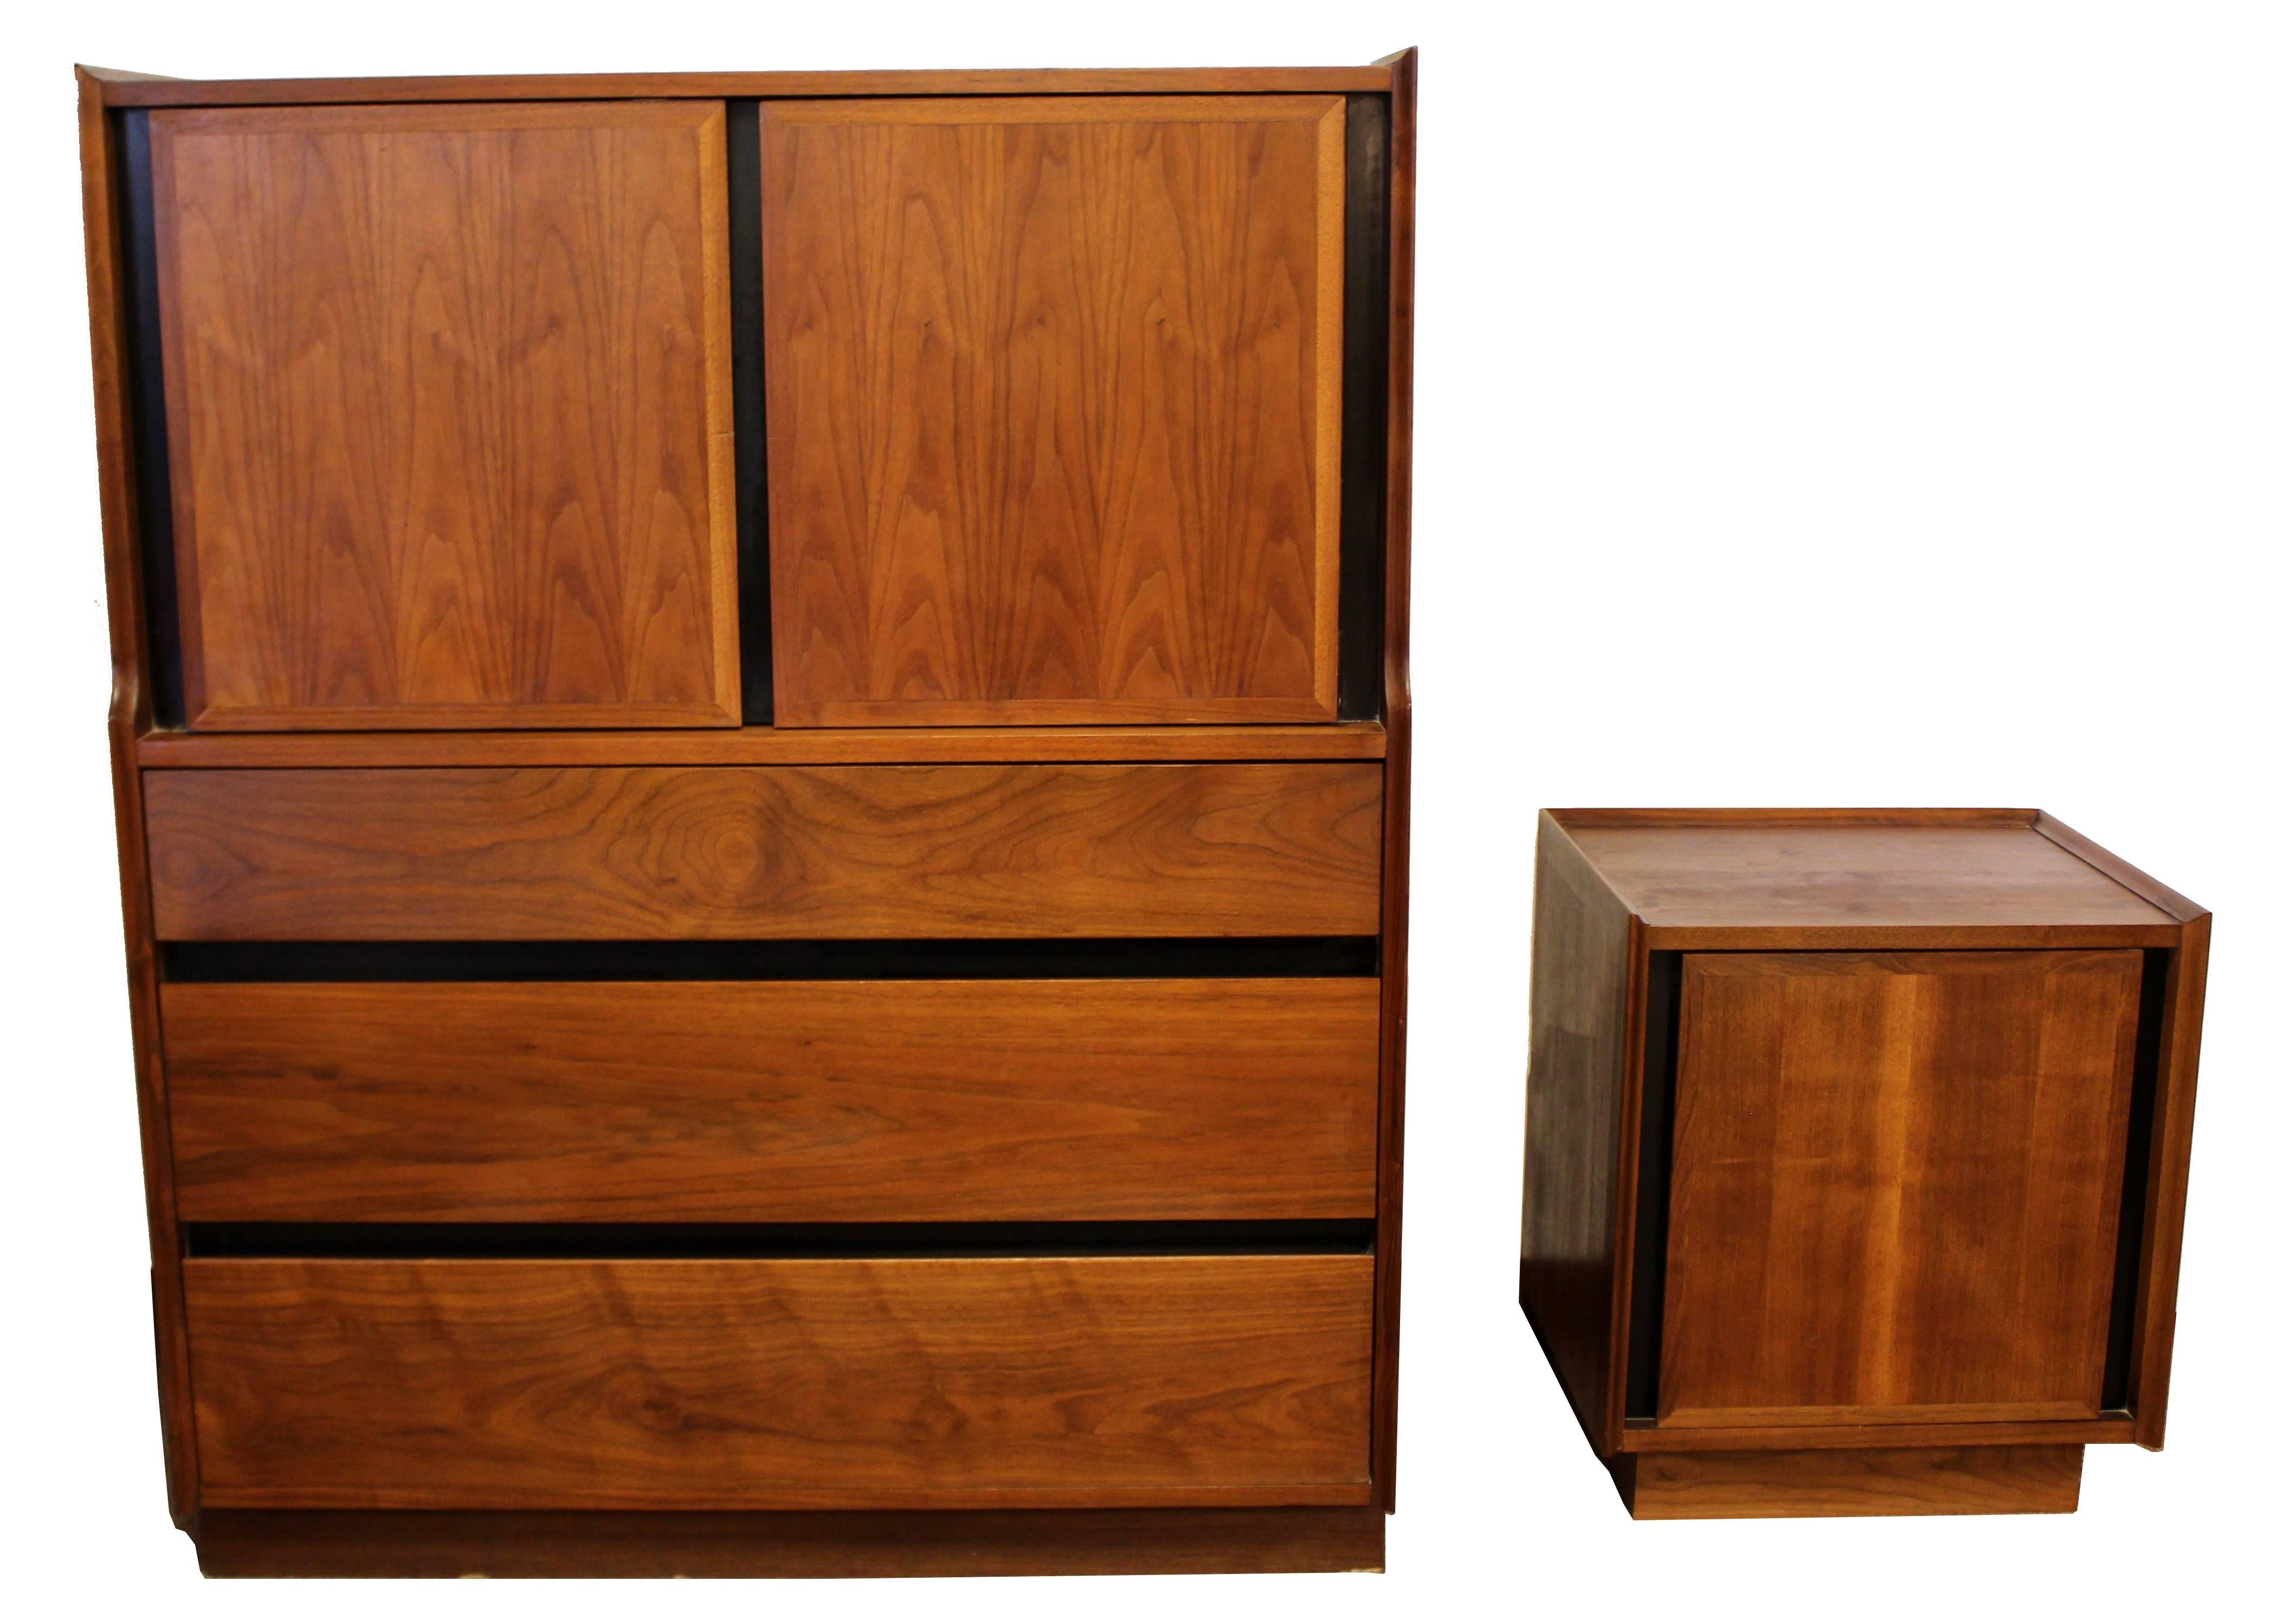 For your consideration is an incredible bedroom set, including a nine-drawer lowboy, a six-drawer highboy, a nightstand, a headboard, foot-board and standing mirror, designed by Merton Gershun for Dillingham Esprit, circa the 1960s. In excellent